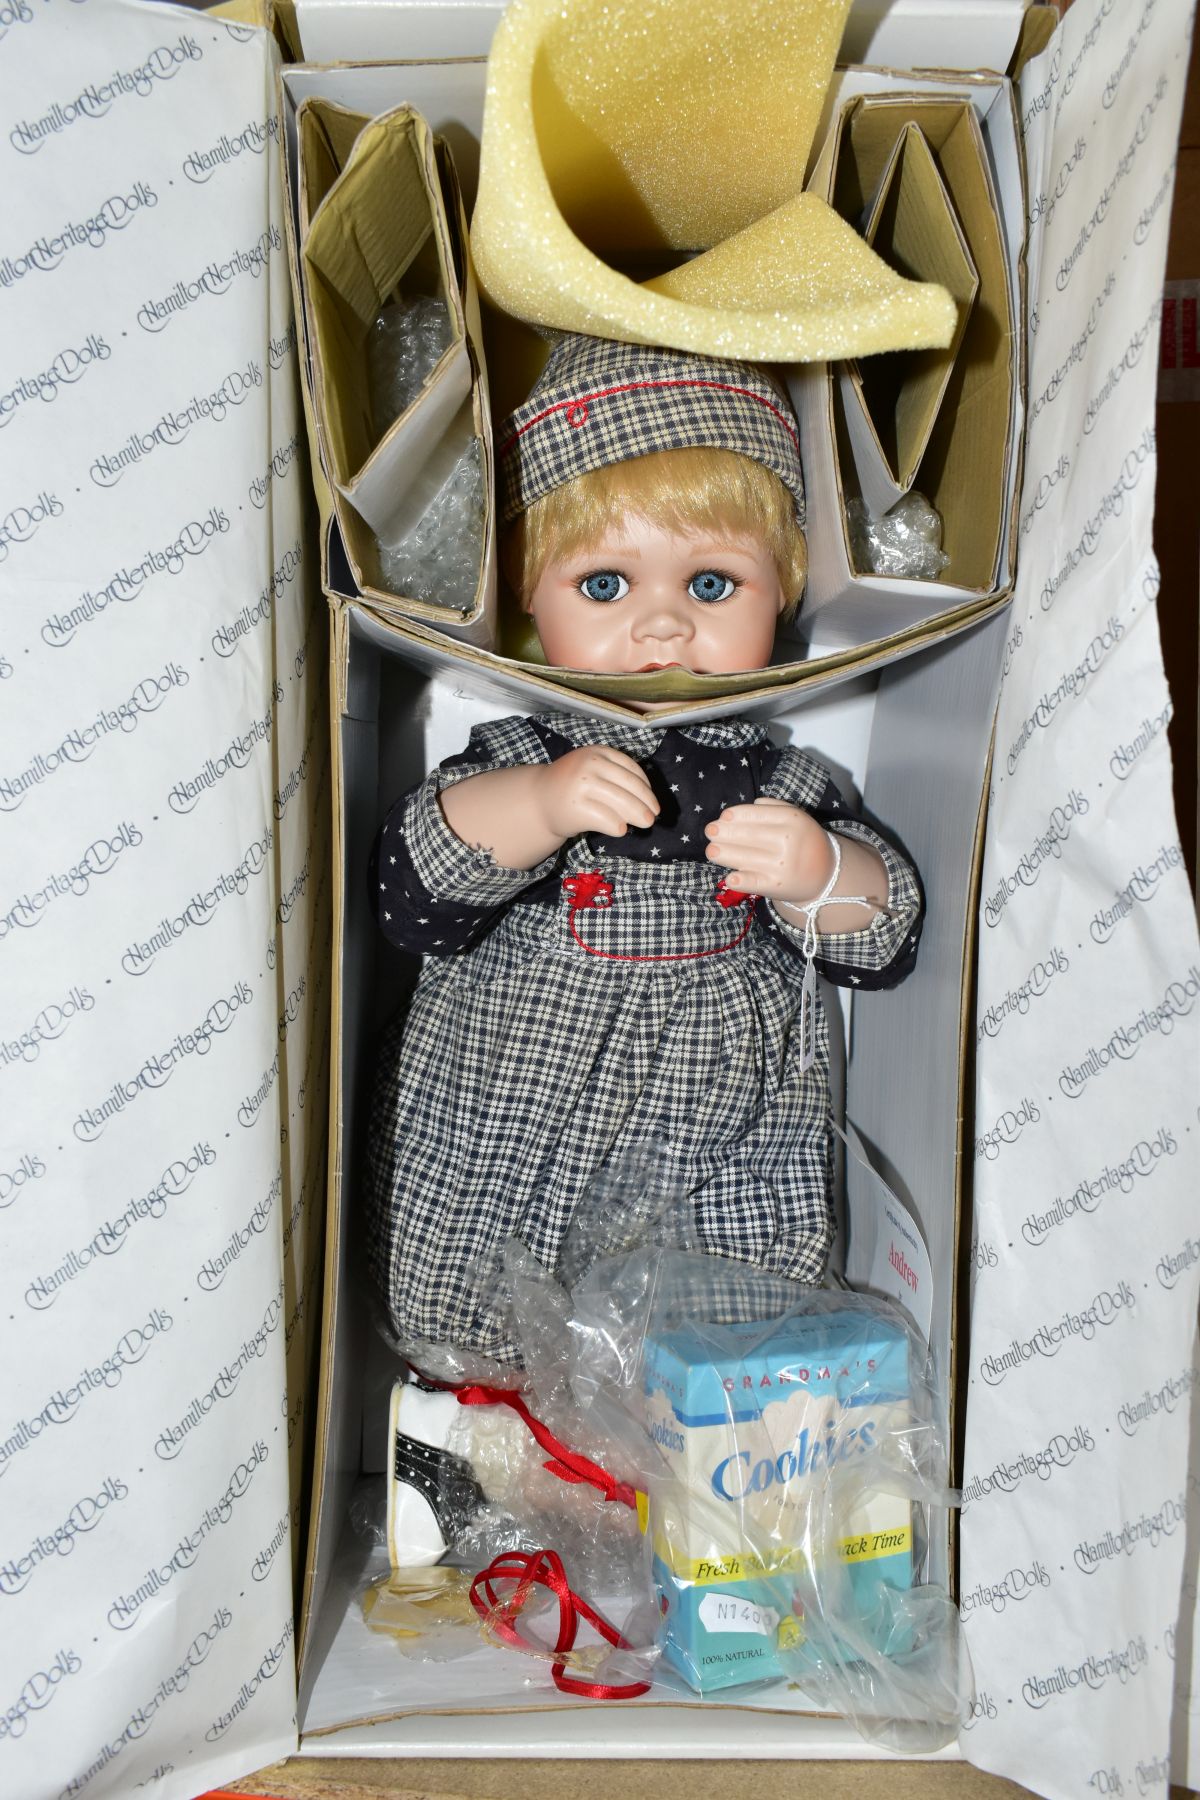 THREE BOXED HAMILTON HERITAGE DOLLS, by Connie Walser Derek, bisque porcelain head and limbs, soft - Image 6 of 7